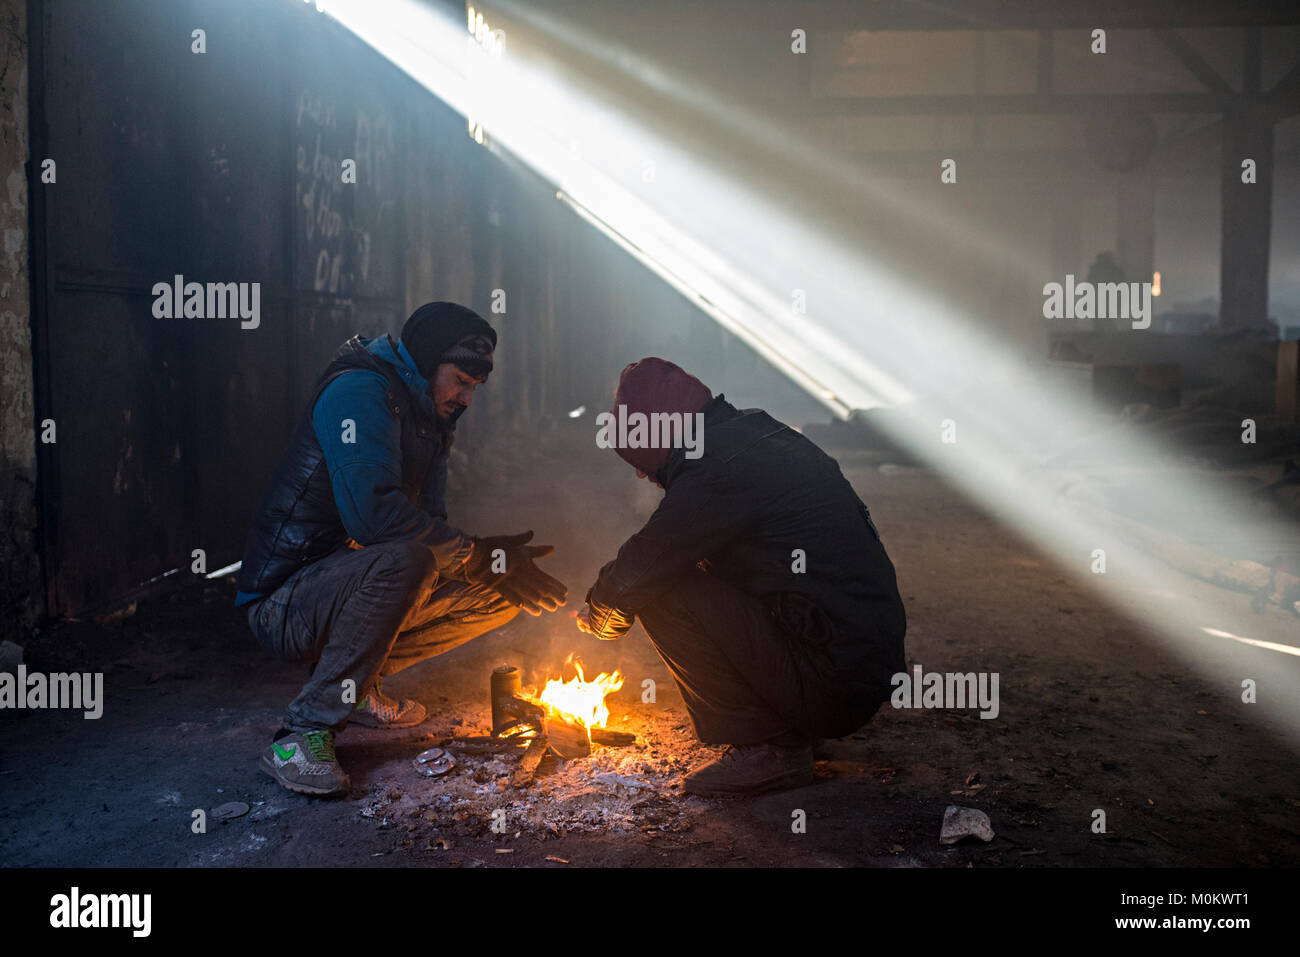 Belgrade, Serbia - January 7, 2017: Refugees try to warm in an abandoned hangar near the main train station. The temperature is minus 12 degrees celsi Stock Photo